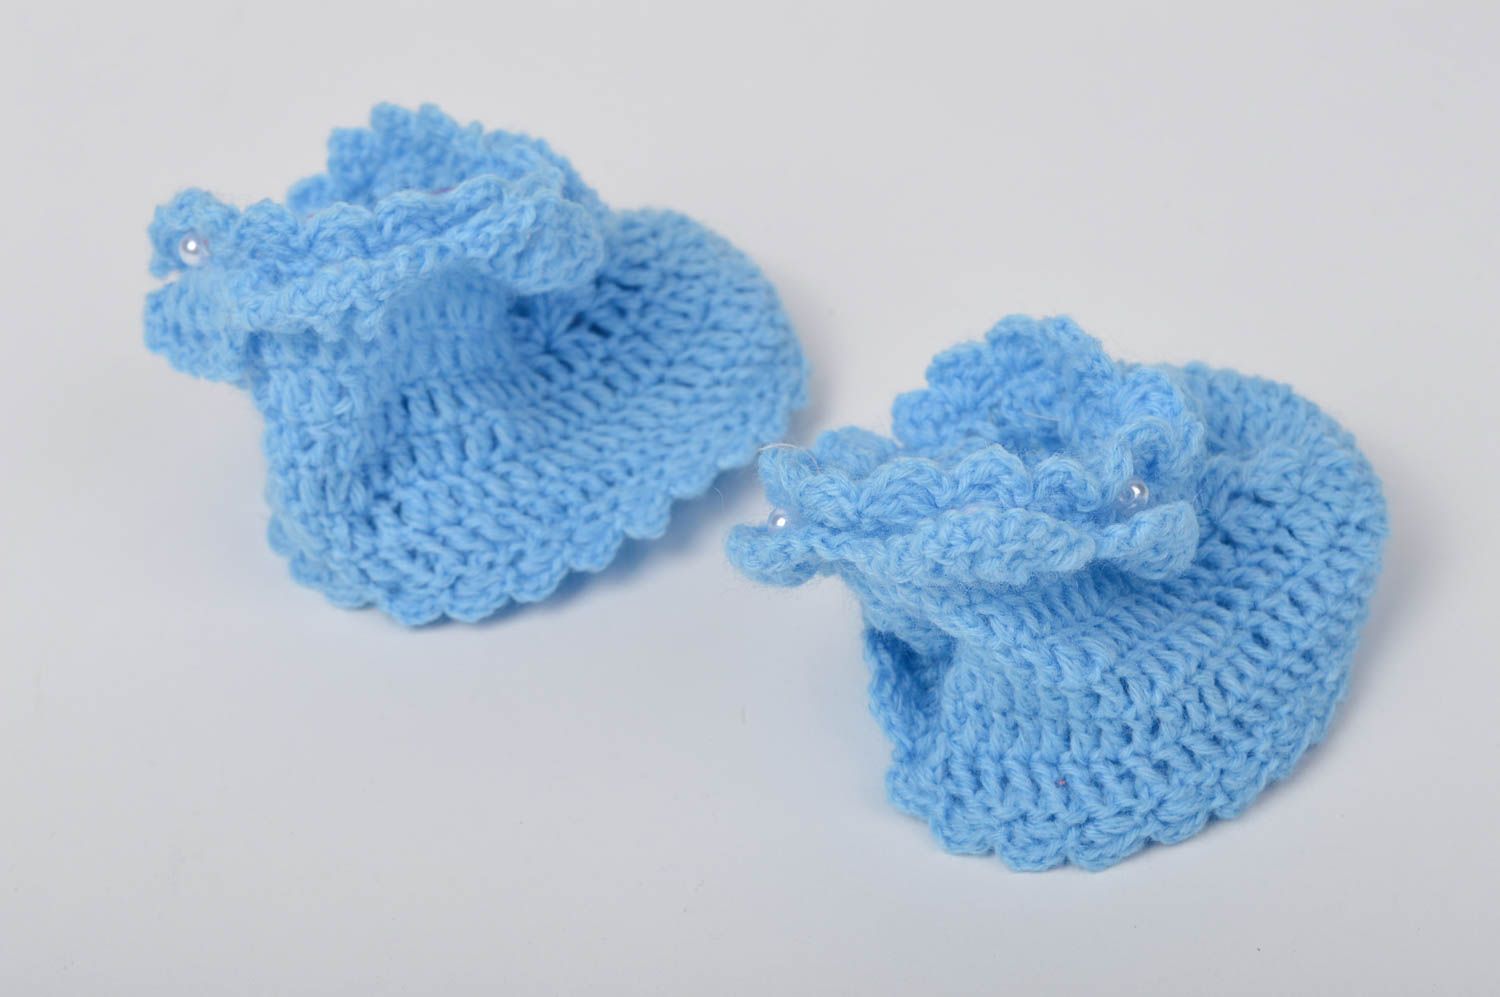 Crocheted booties for babies knitted socks crochet booties for baby unusual gift photo 5